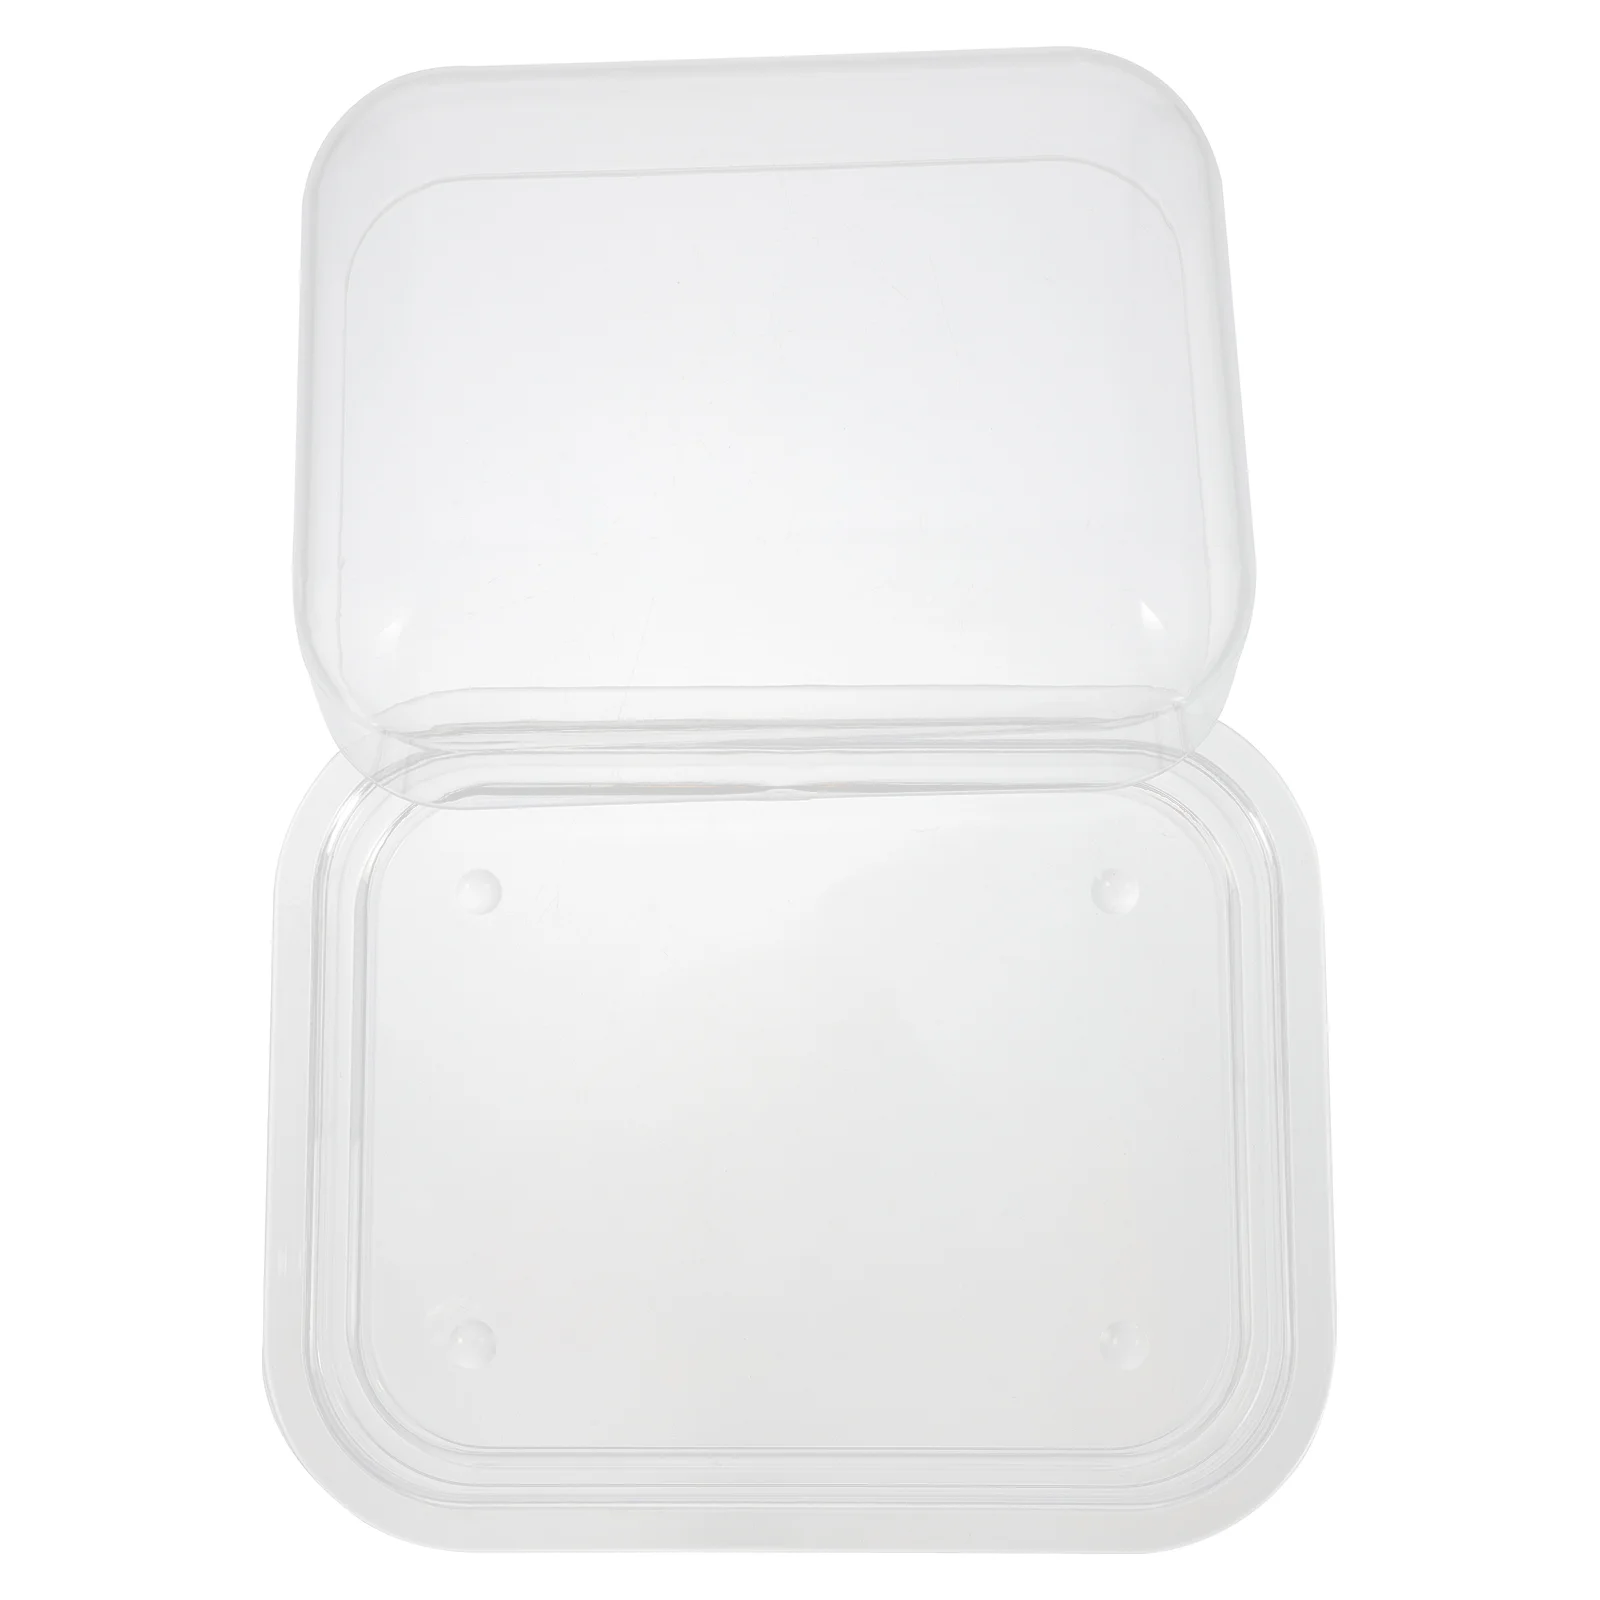 

Butter Dish Container Lid Keeper Holder Plate Cheese Box Tray Dishes Storage Serving Covered Dessert Refrigerator Plastic